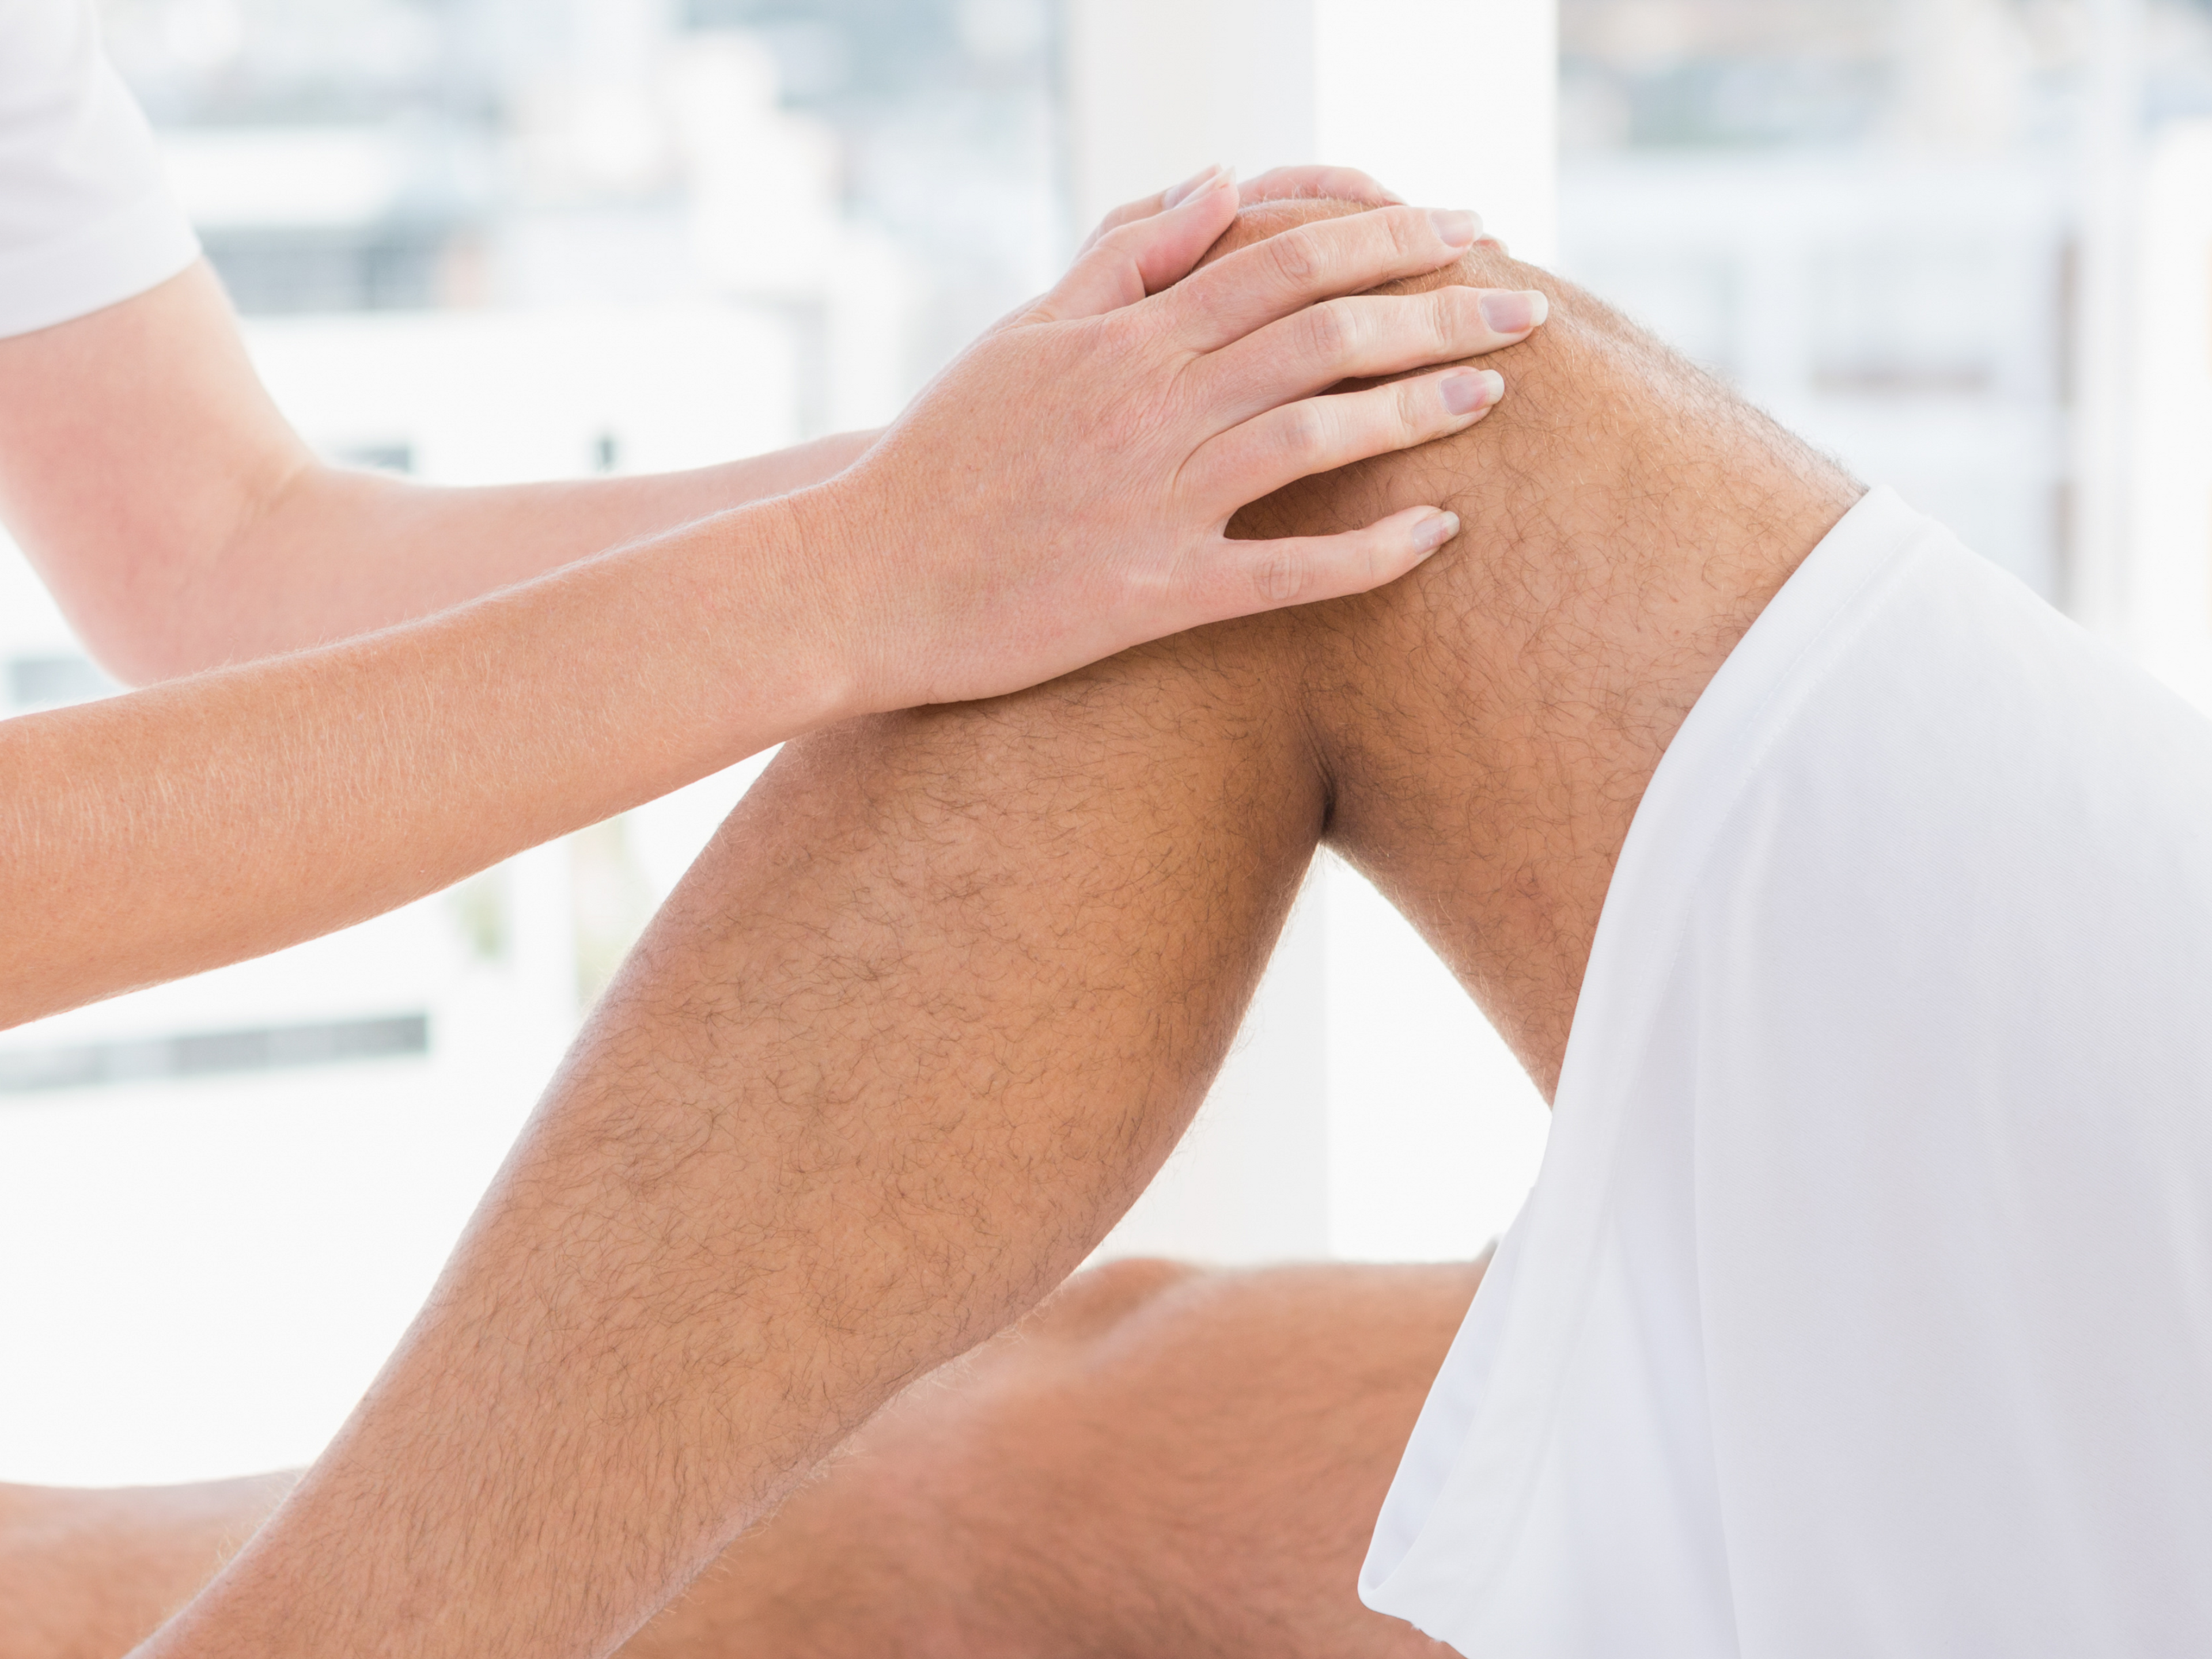 Massage can be a pain relief for patellar tendonitis.